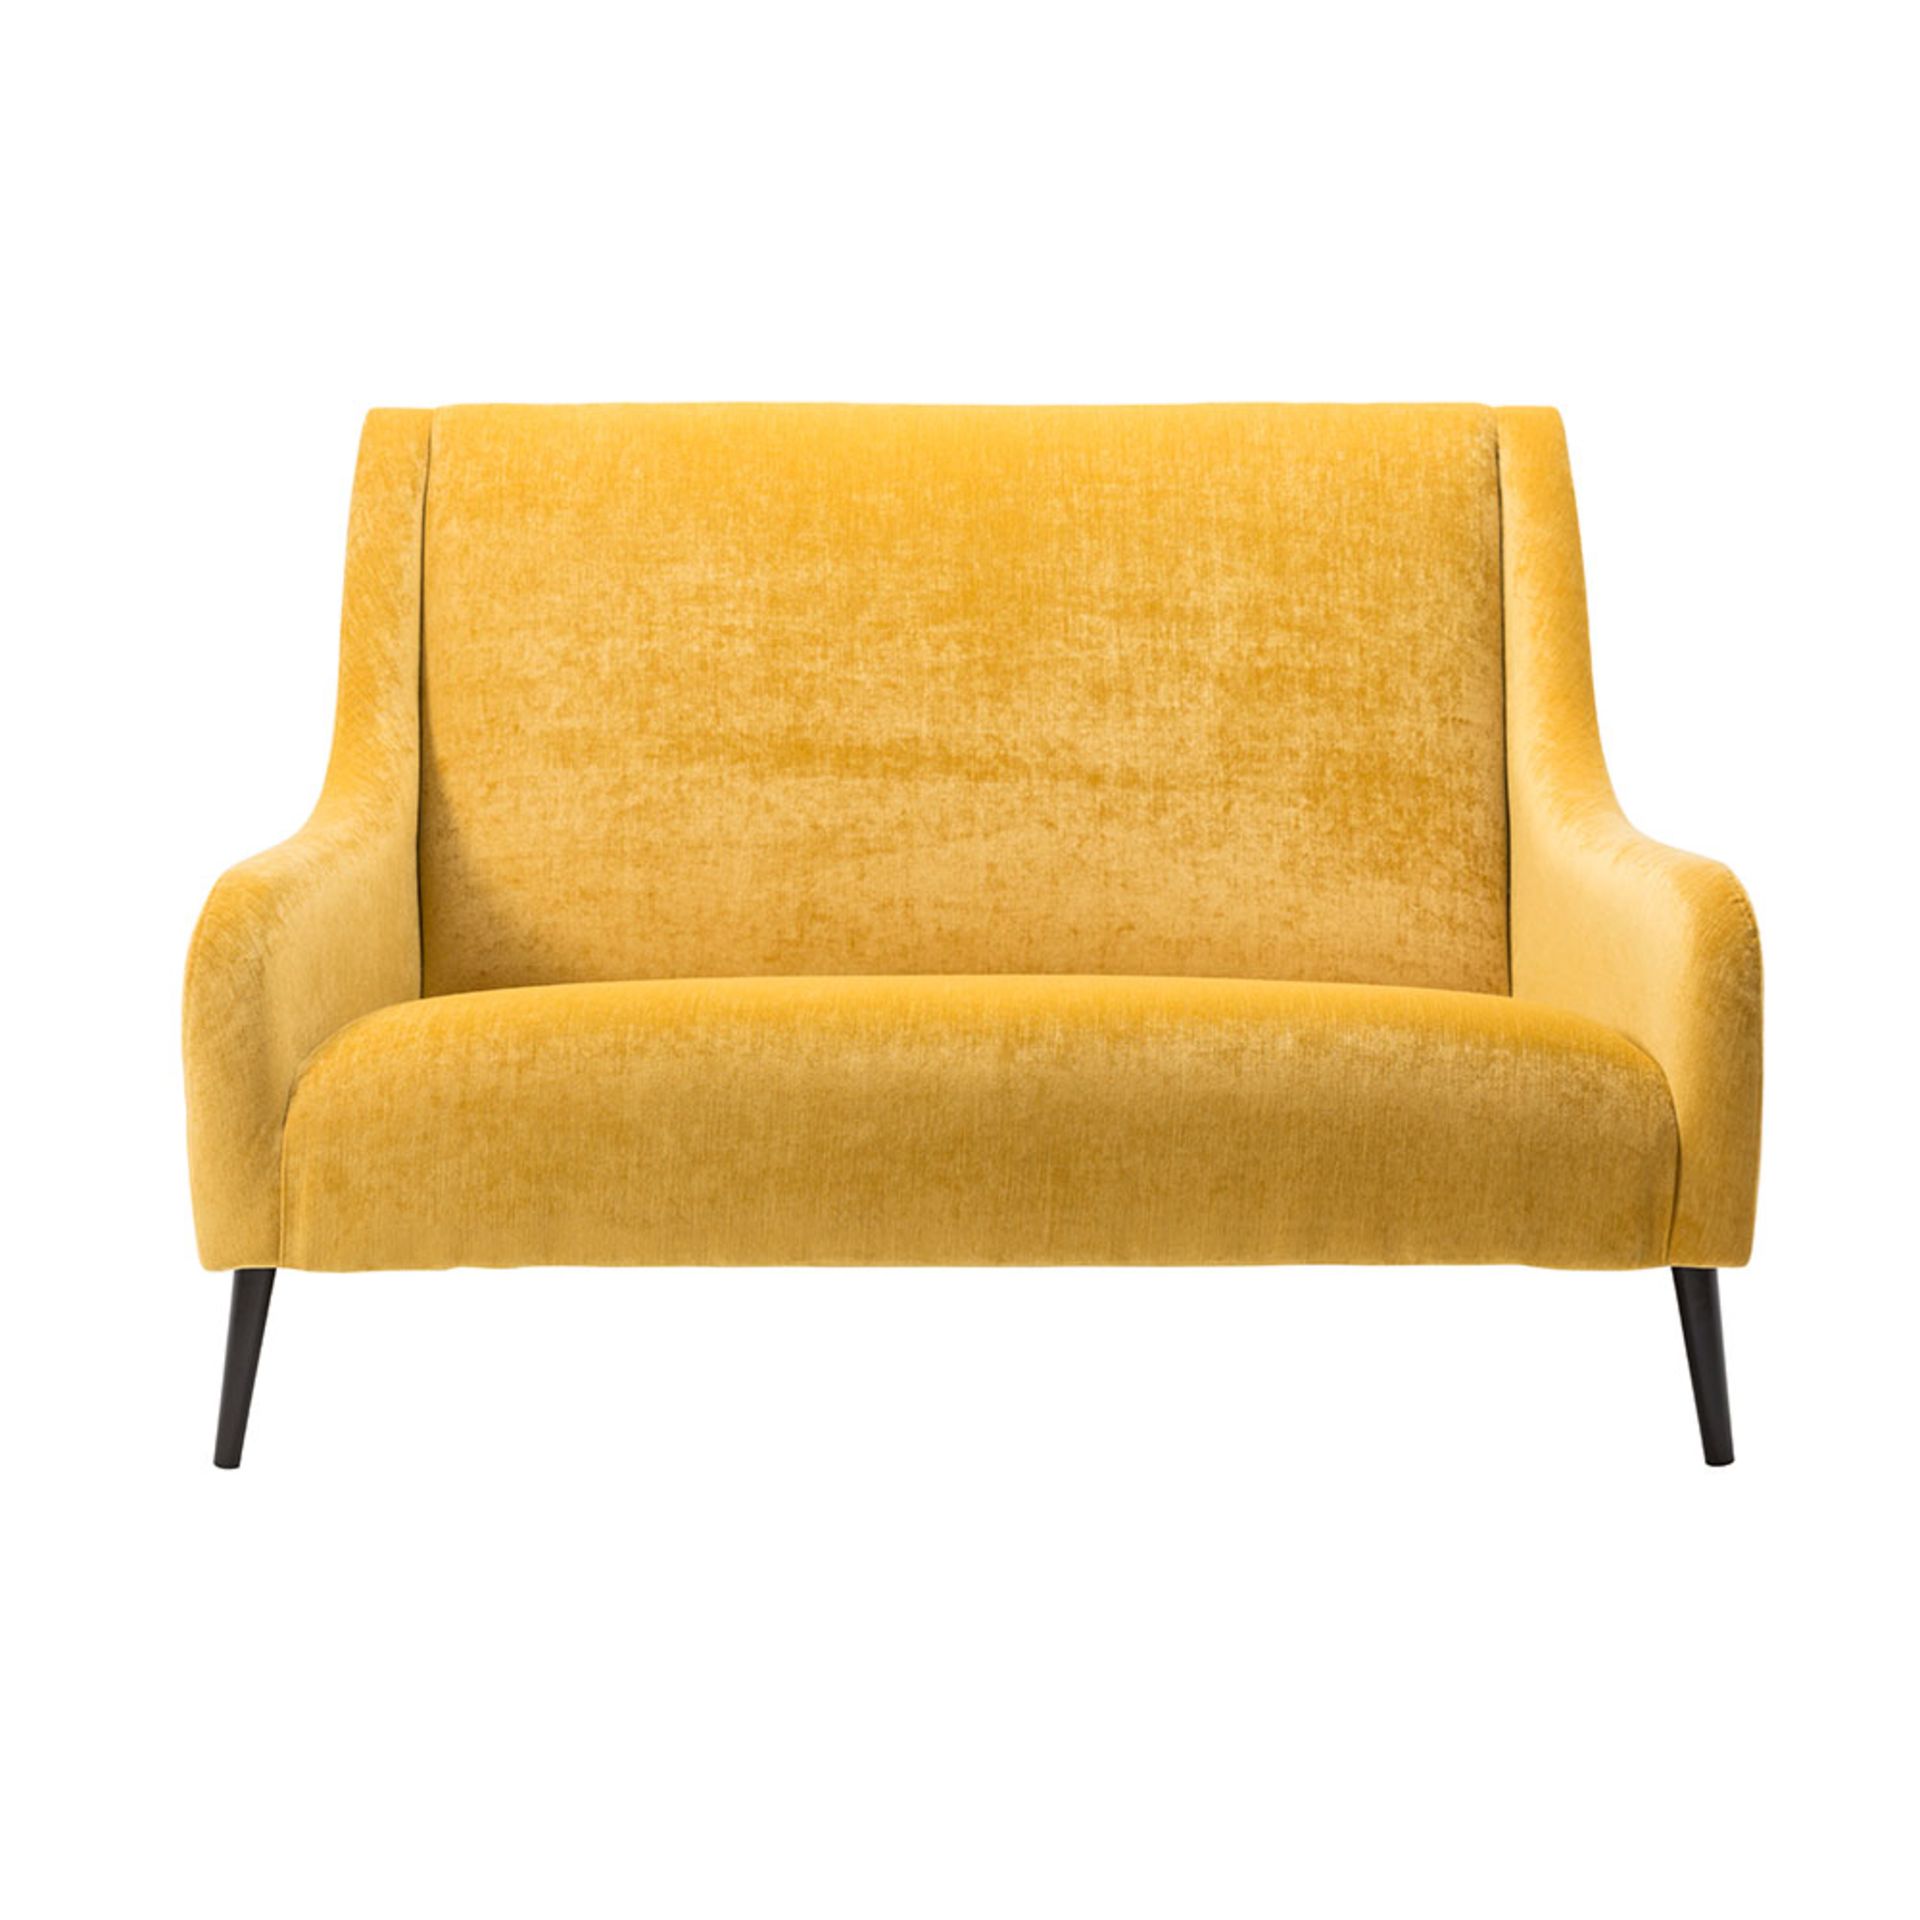 1 x Lauran Golden Sunflower Contemporary Sofa - RRP £1,029! - Image 5 of 5